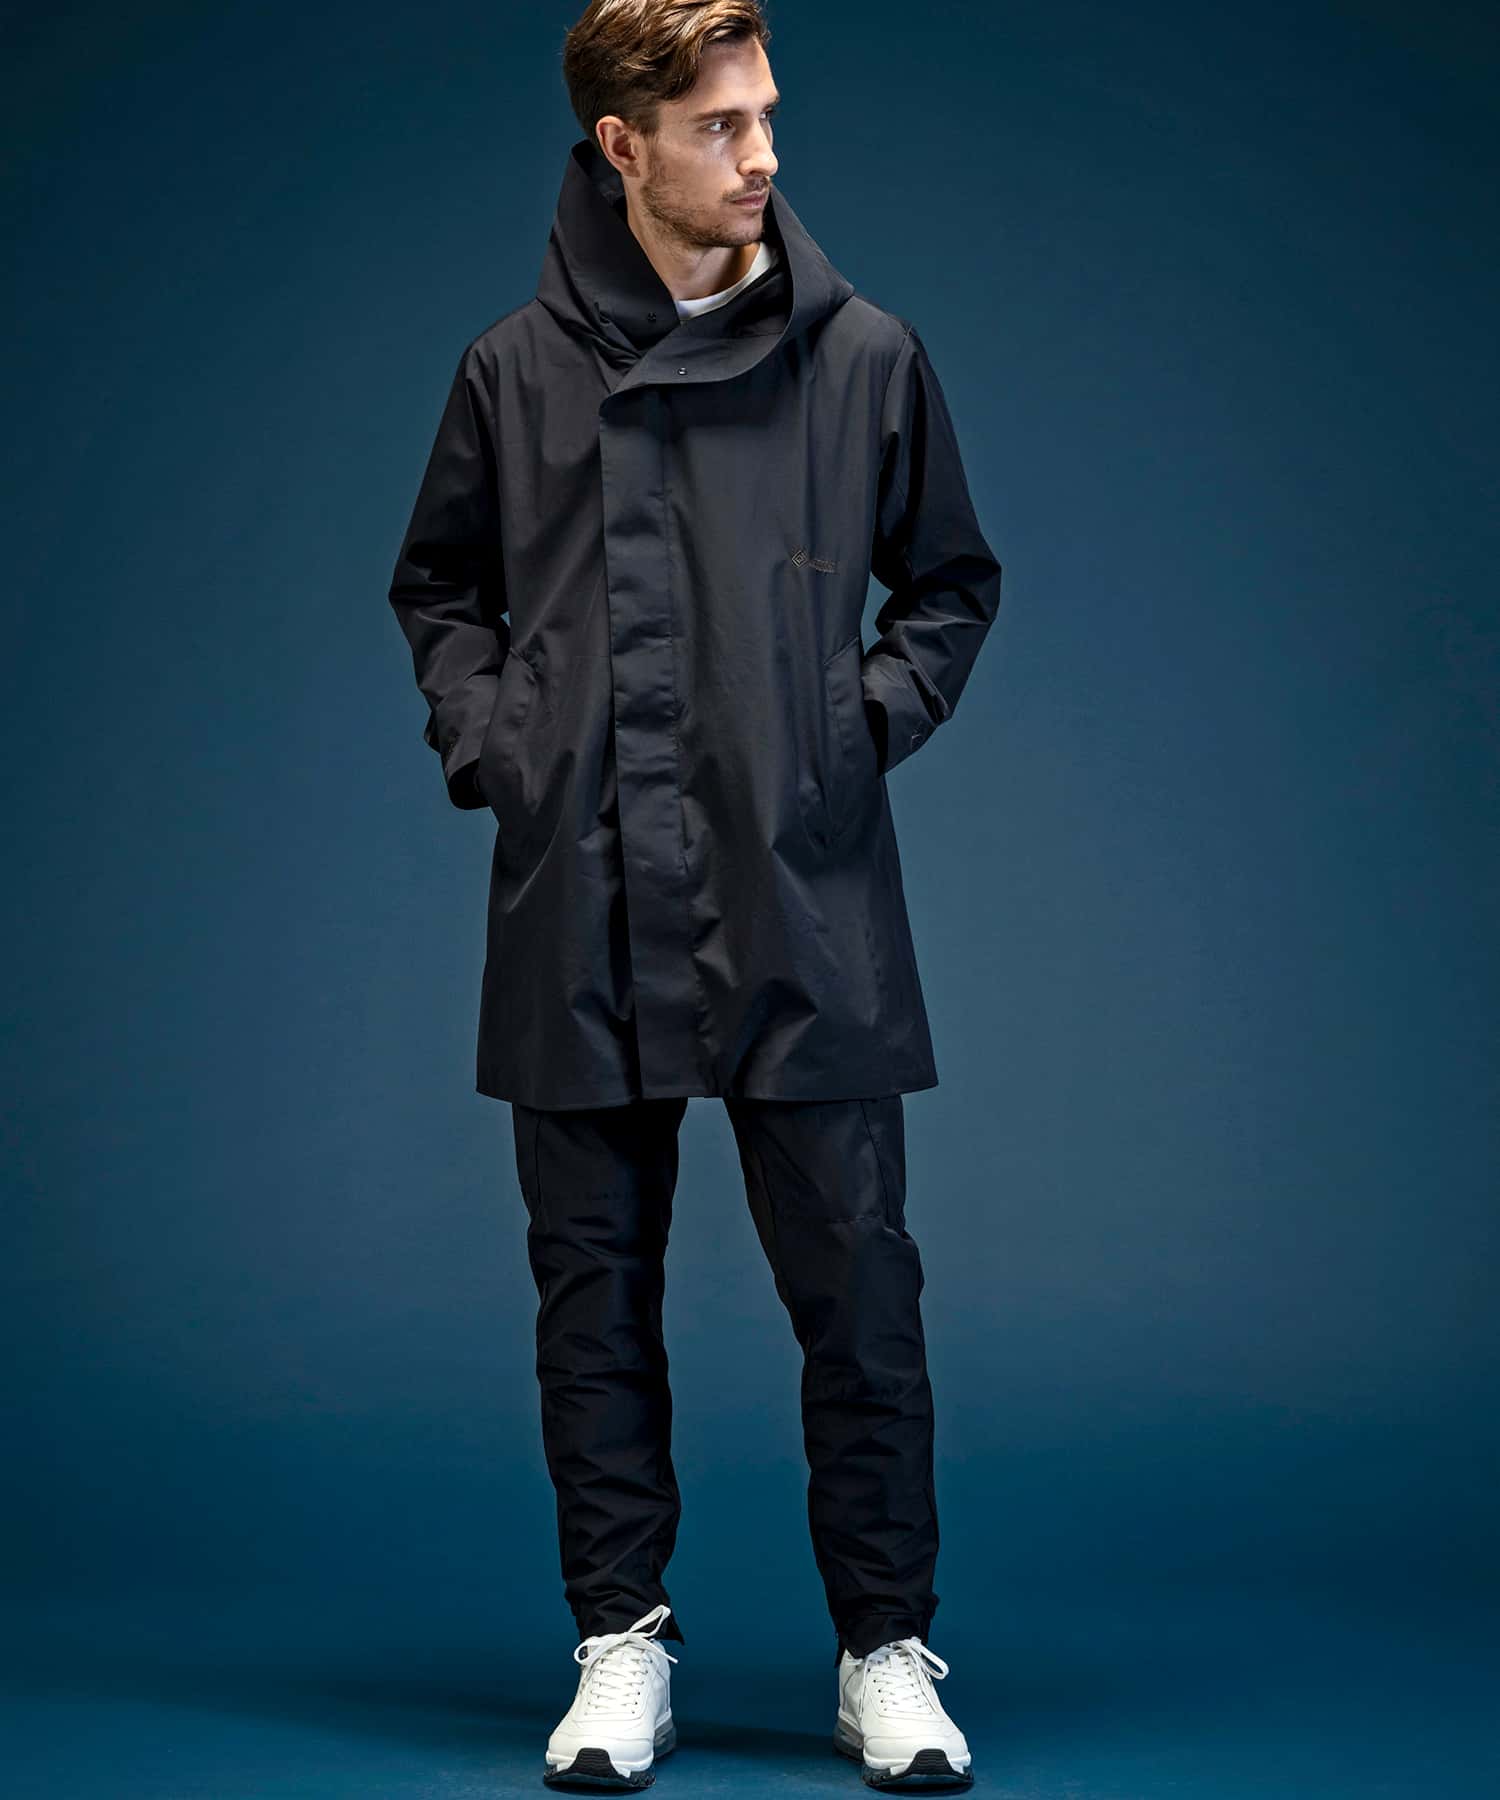 MENS】ラップコート WINDSTOPPER プロダクト by GORE-TEX LABS 